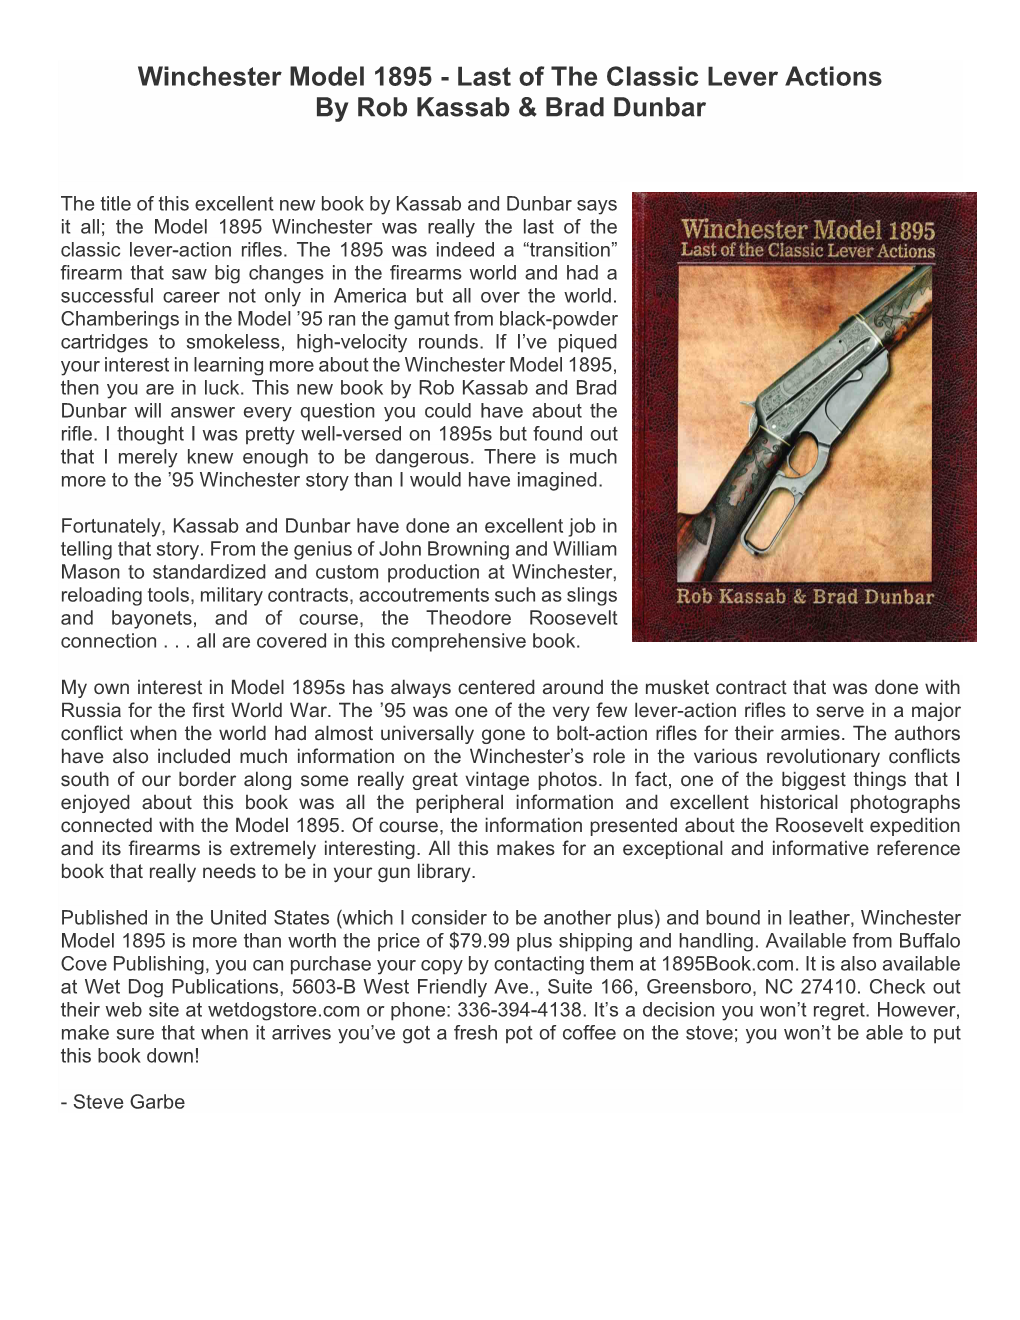 Last of the Classic Lever Actions by Rob Kassab & Brad Dunbar